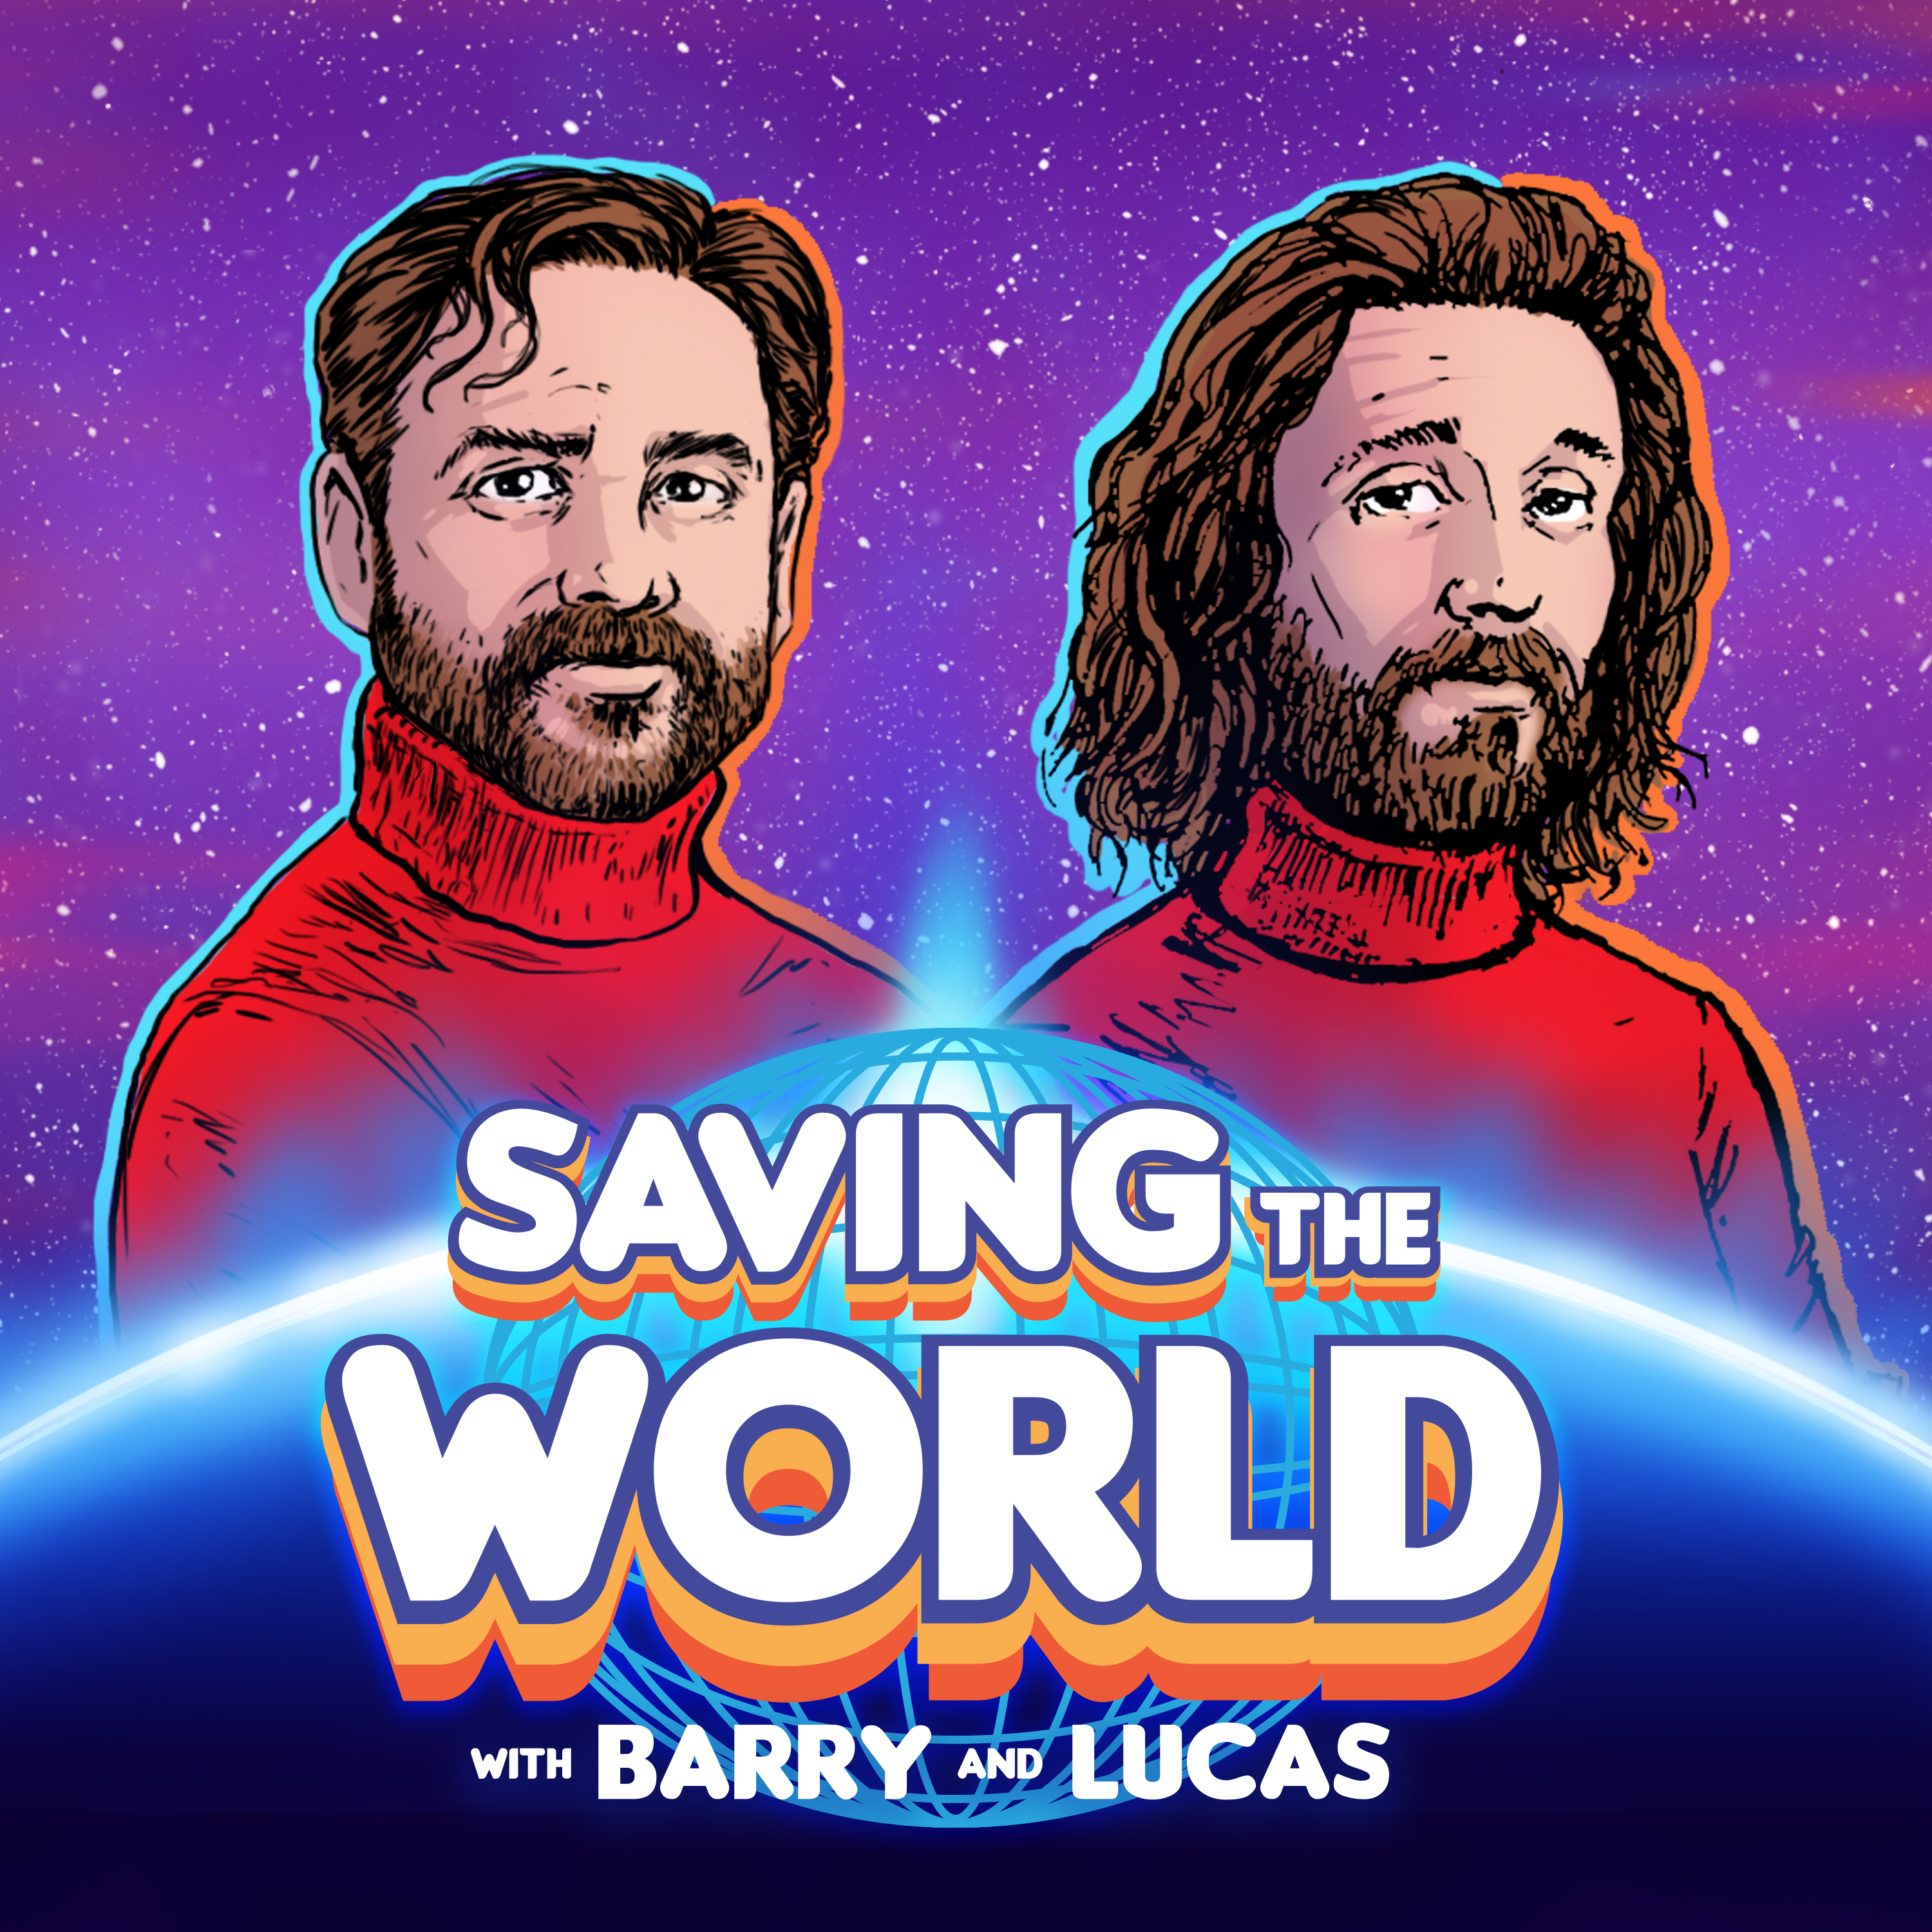 Saving the World Podcast Cover - Square